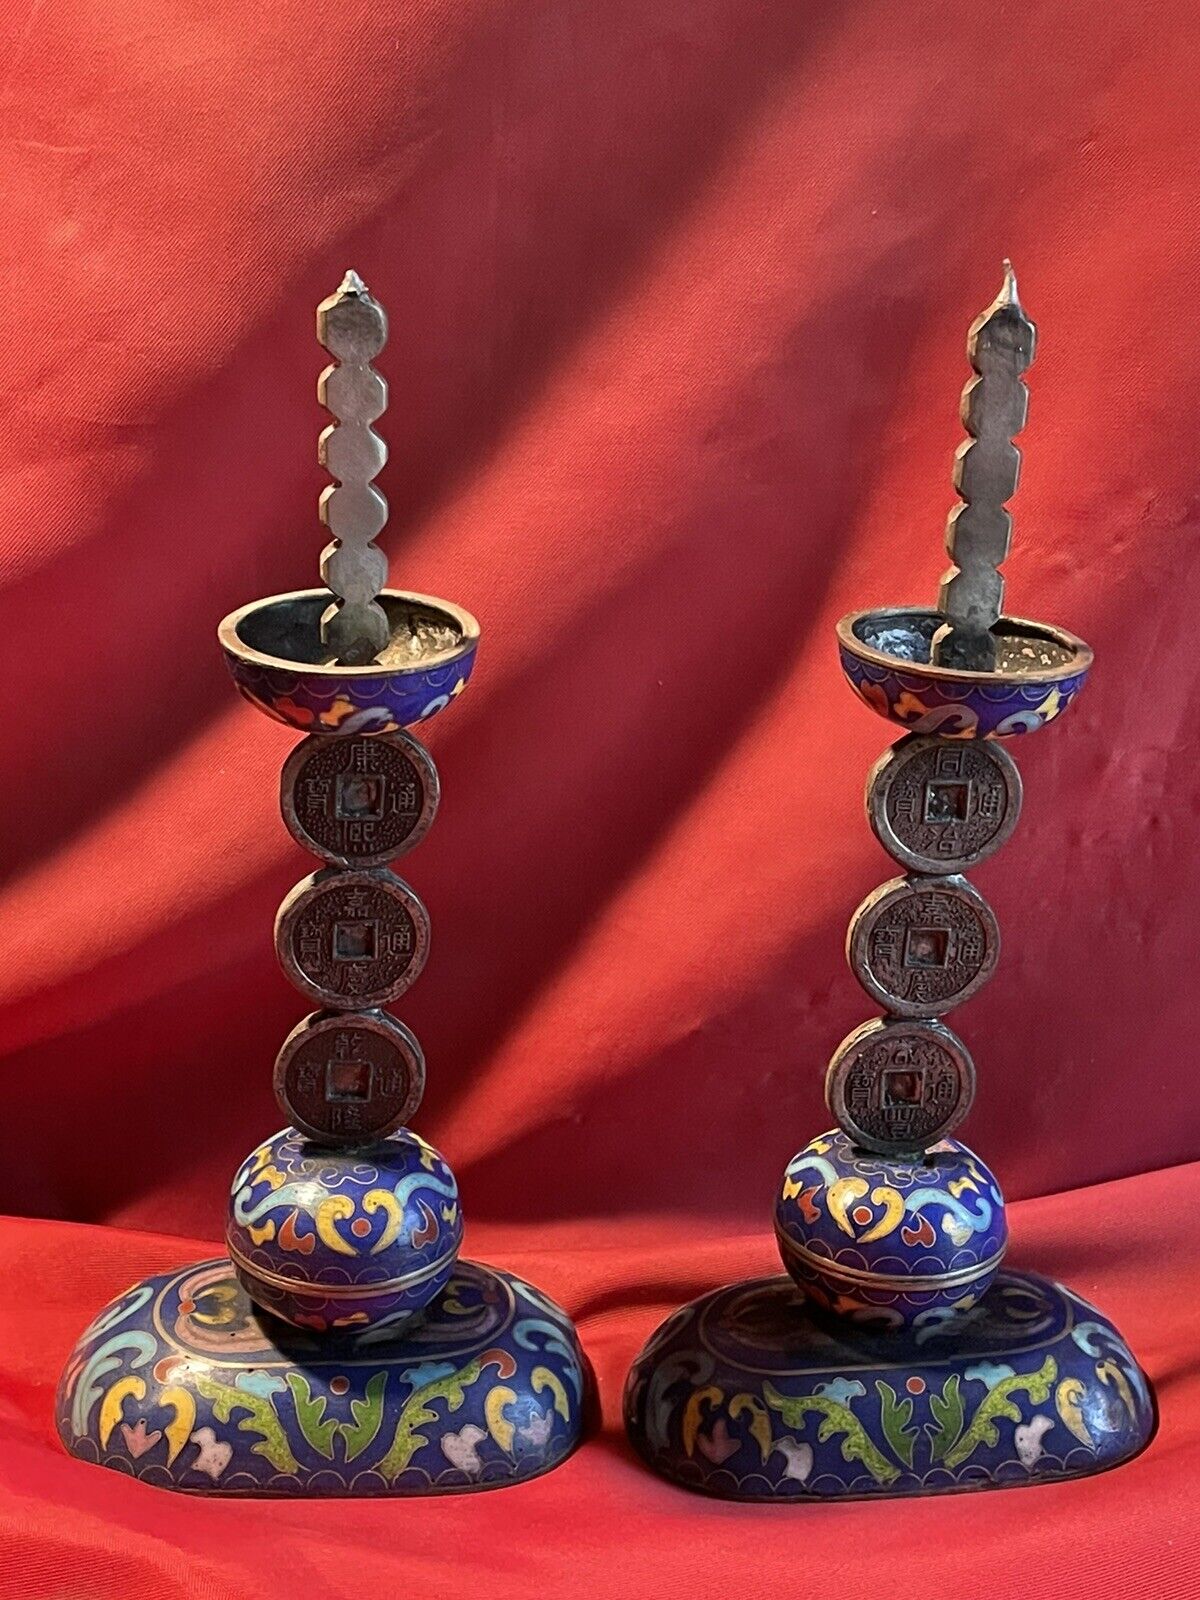 one pair of old cloissone candlestick holders vintage blue As Is